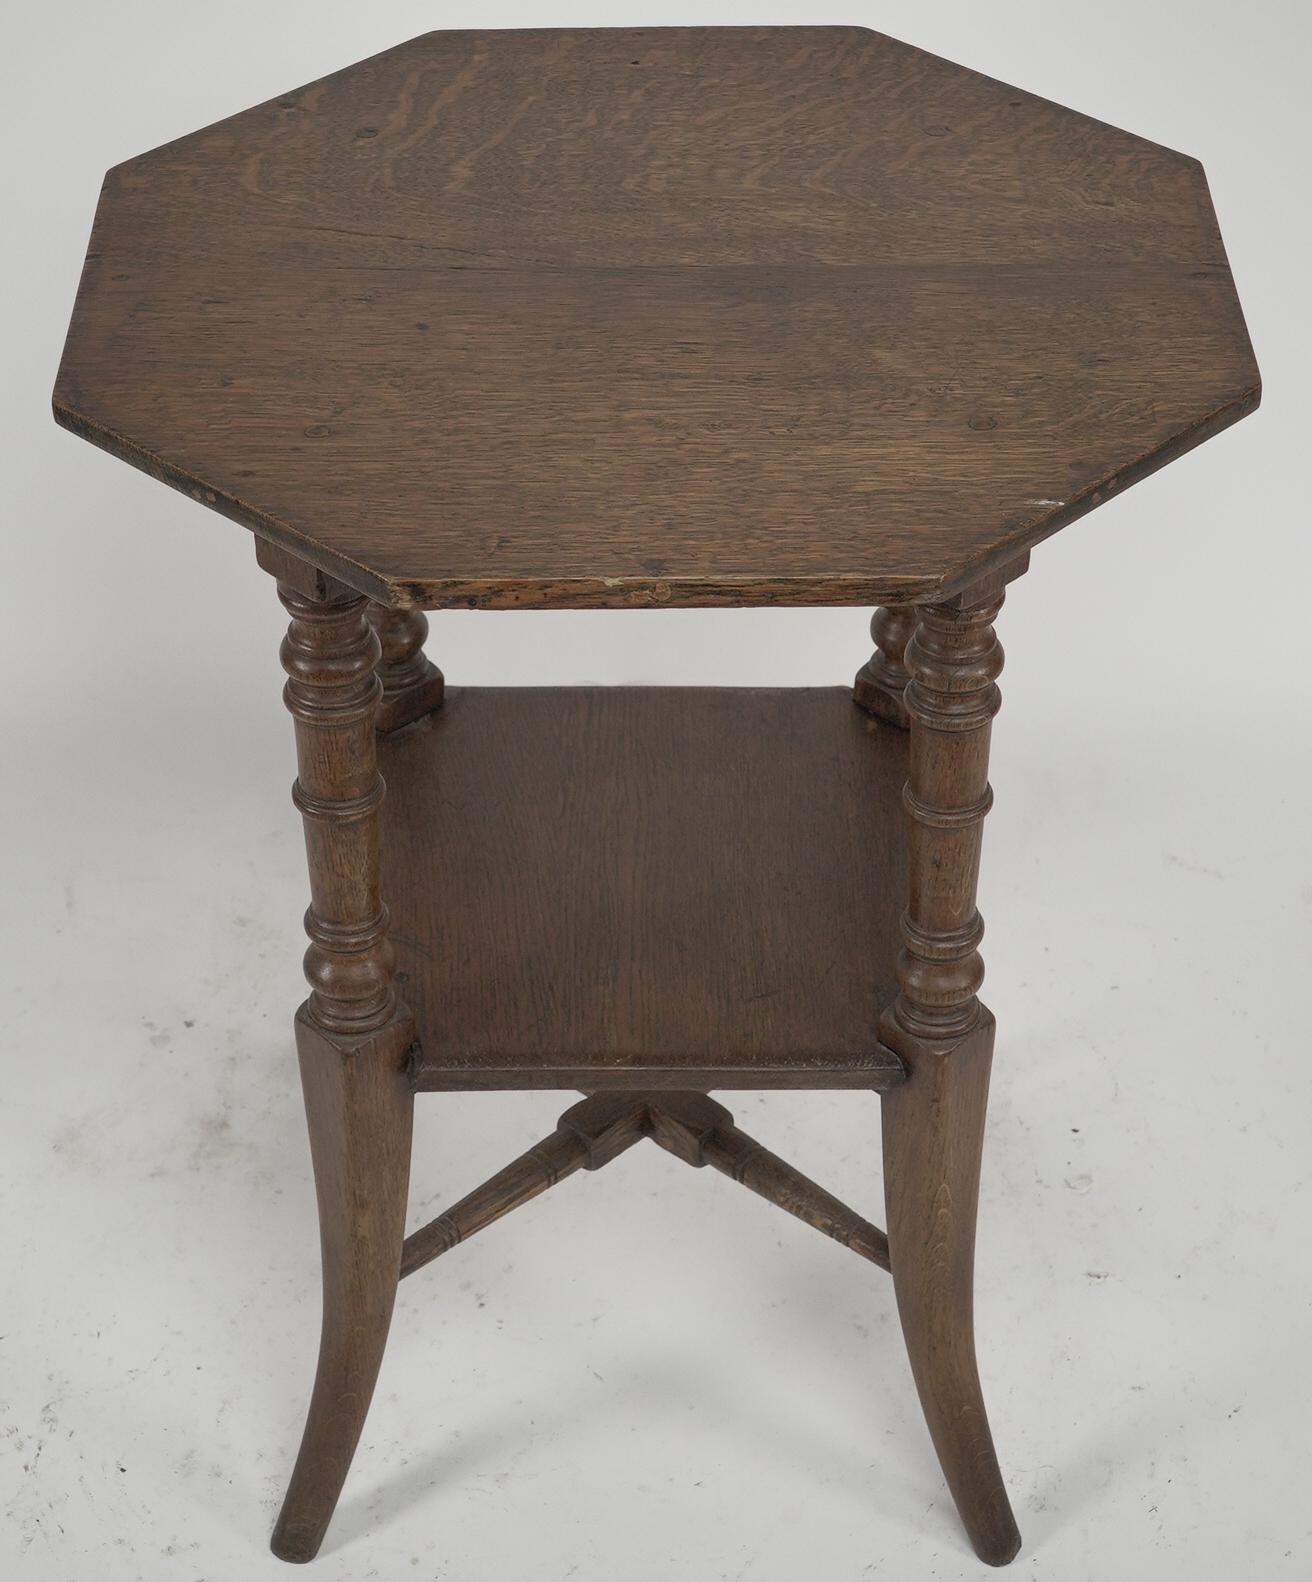 Aesthetic Movement Jas Shoolbred and Co (attributed) An octagonal oak side table with central shelf For Sale